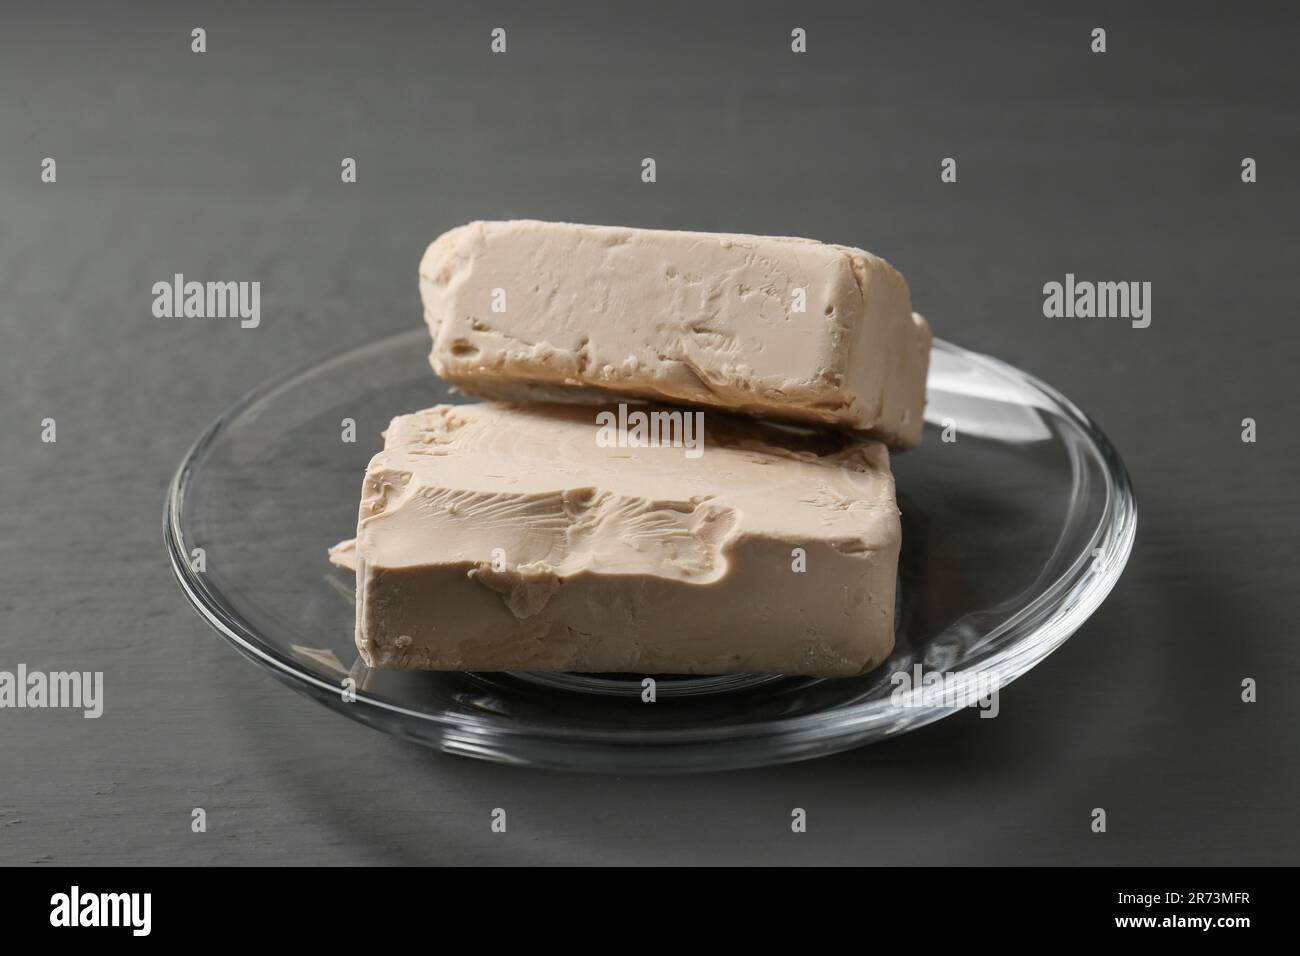 Fresh compressed yeast on grey wooden table Stock Photo